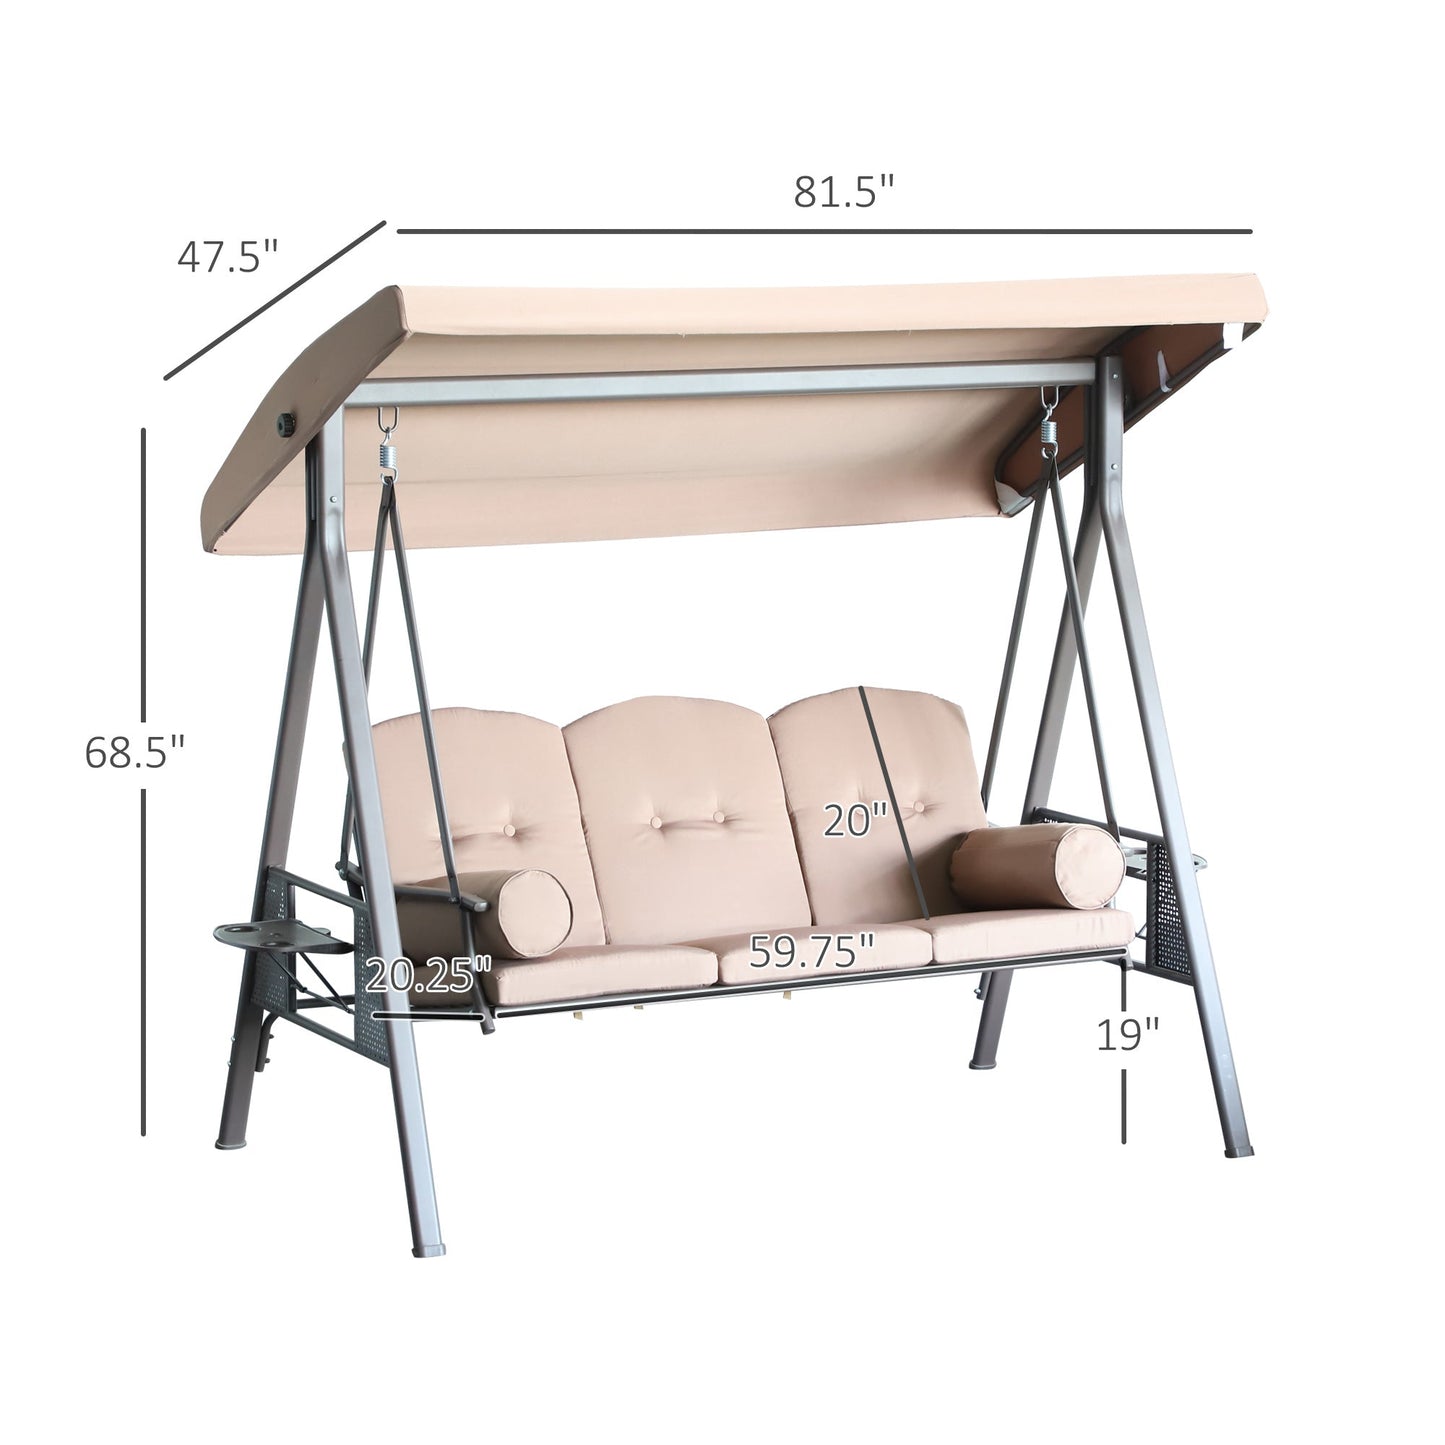 Outdoor and Garden-Outdoor Patio 3-Person Steel Canopy Cushioned Seat Bench Swing with Included Side Trays & Padded Comfort, Brown - Outdoor Style Company